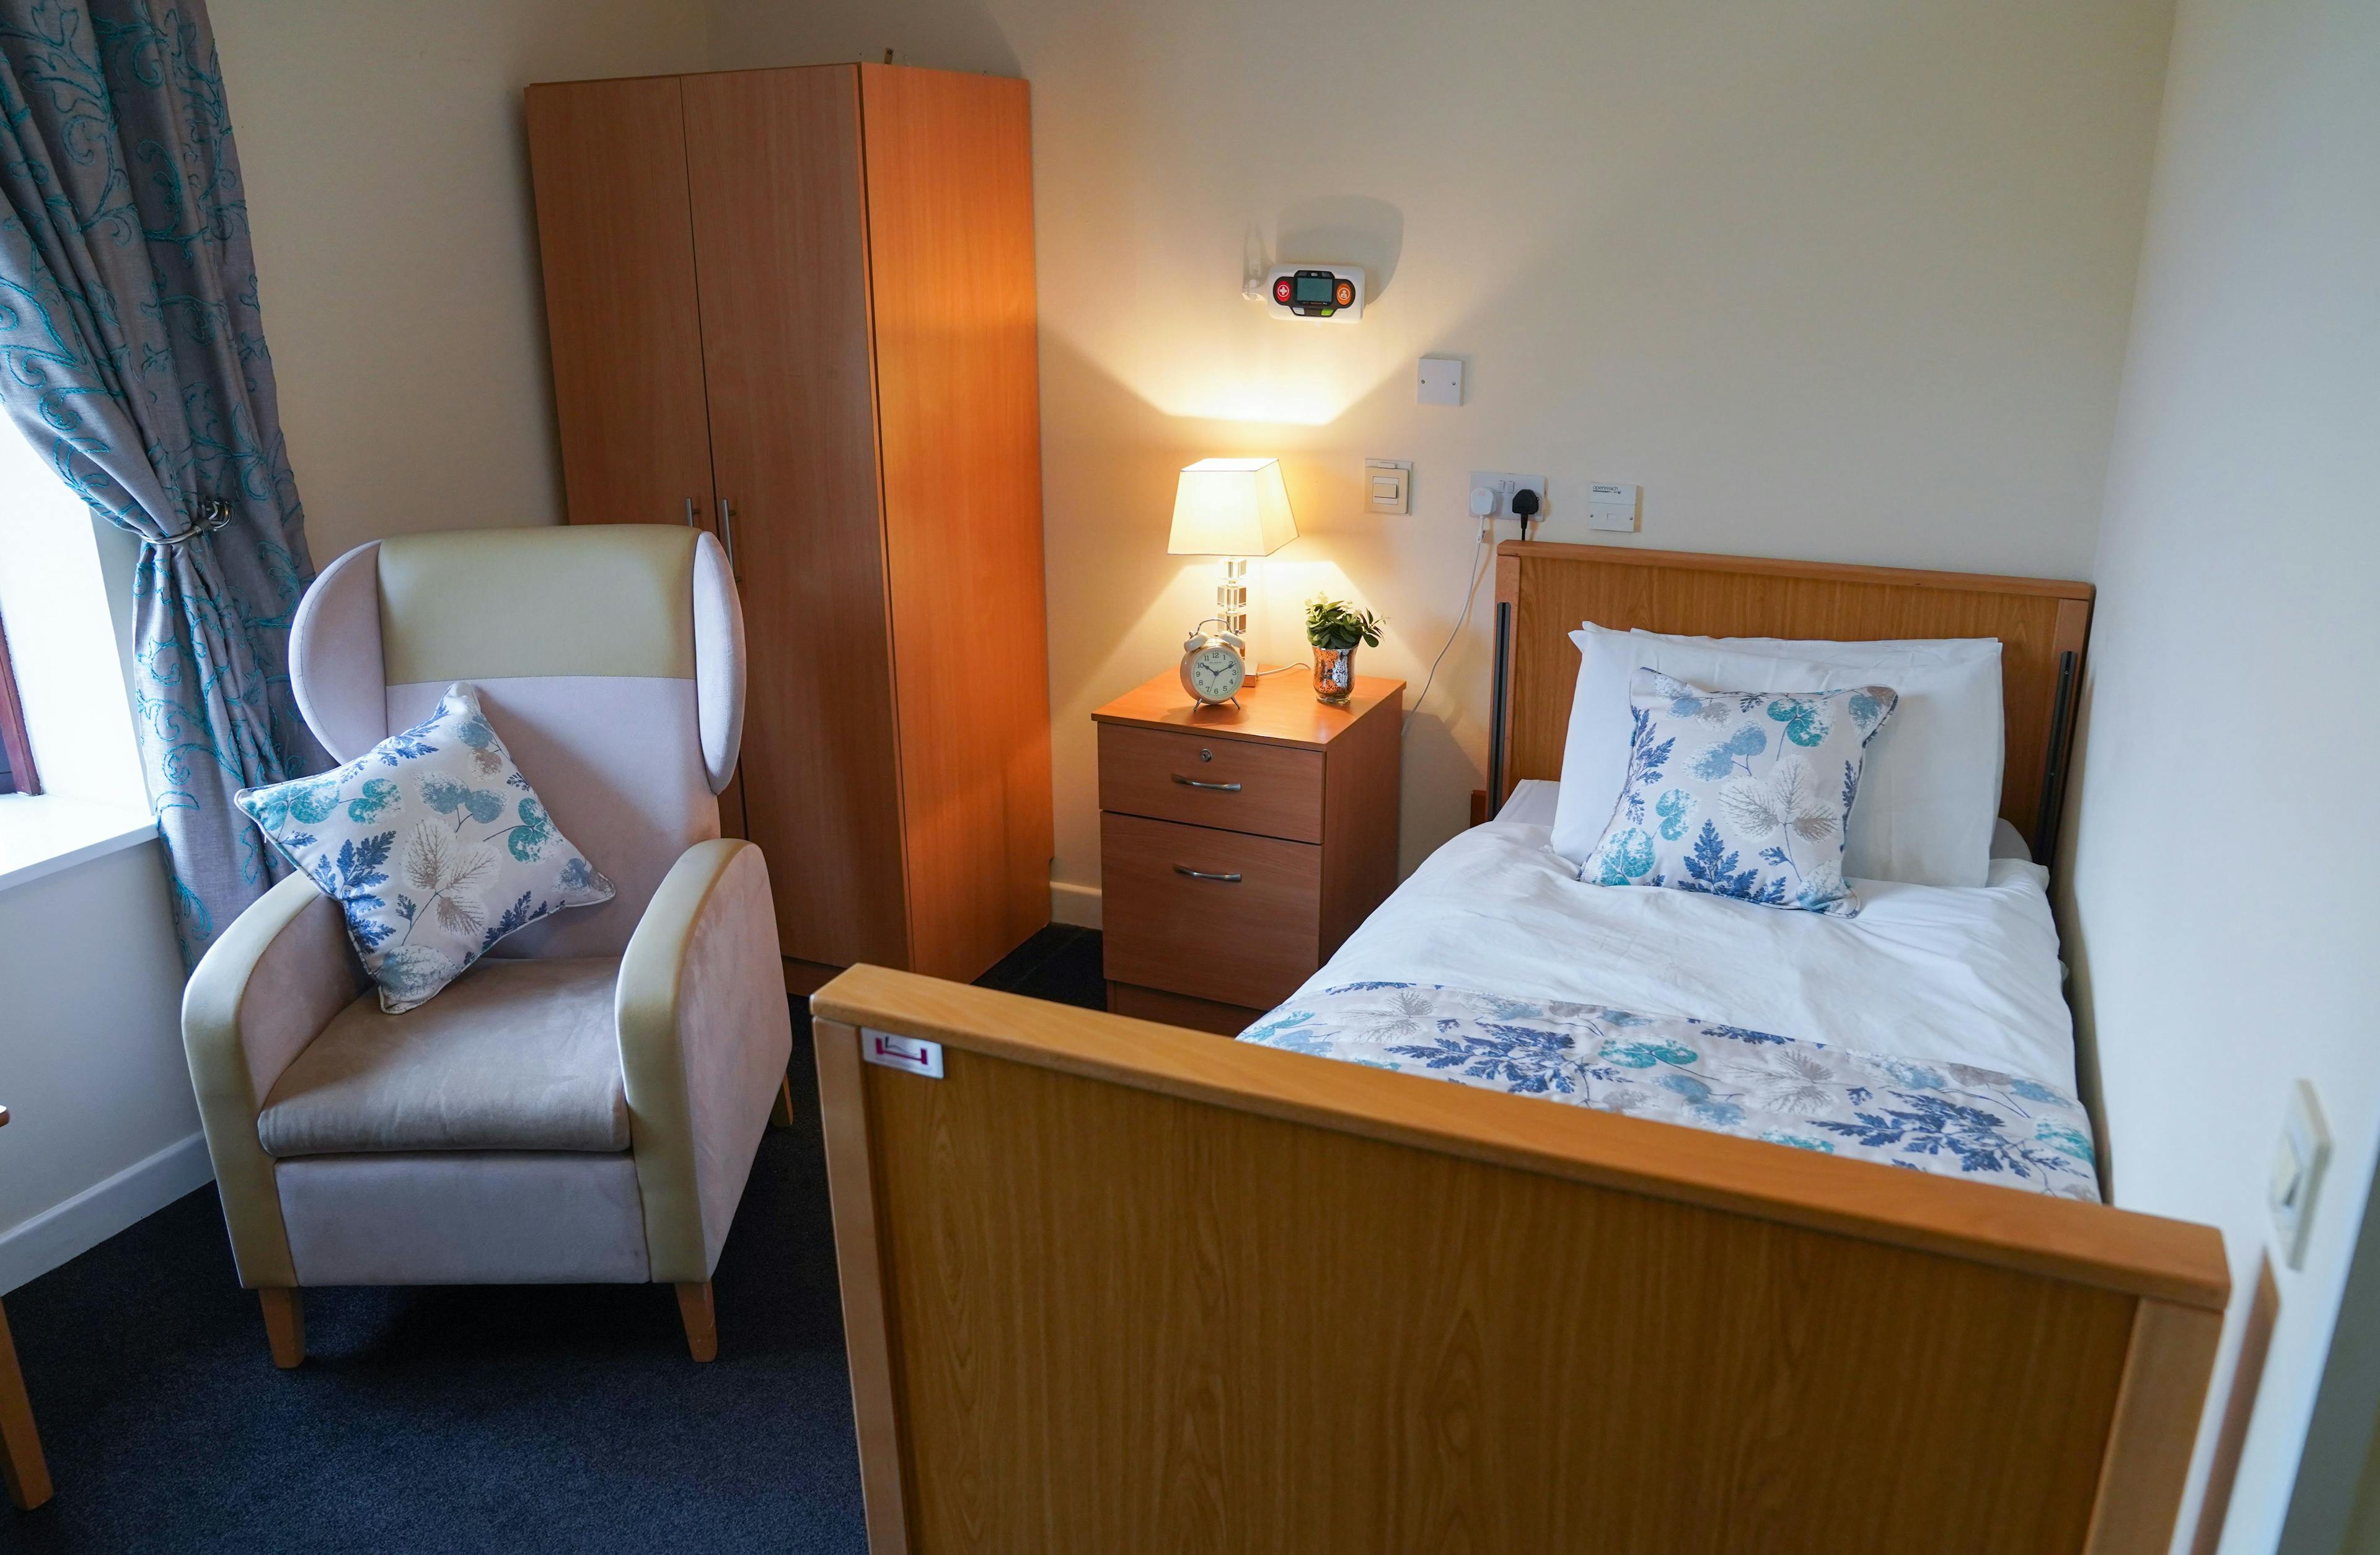 Bedroom at Broadmeadow Court Care Home in Newcastle-under-Lyme, Staffordshire